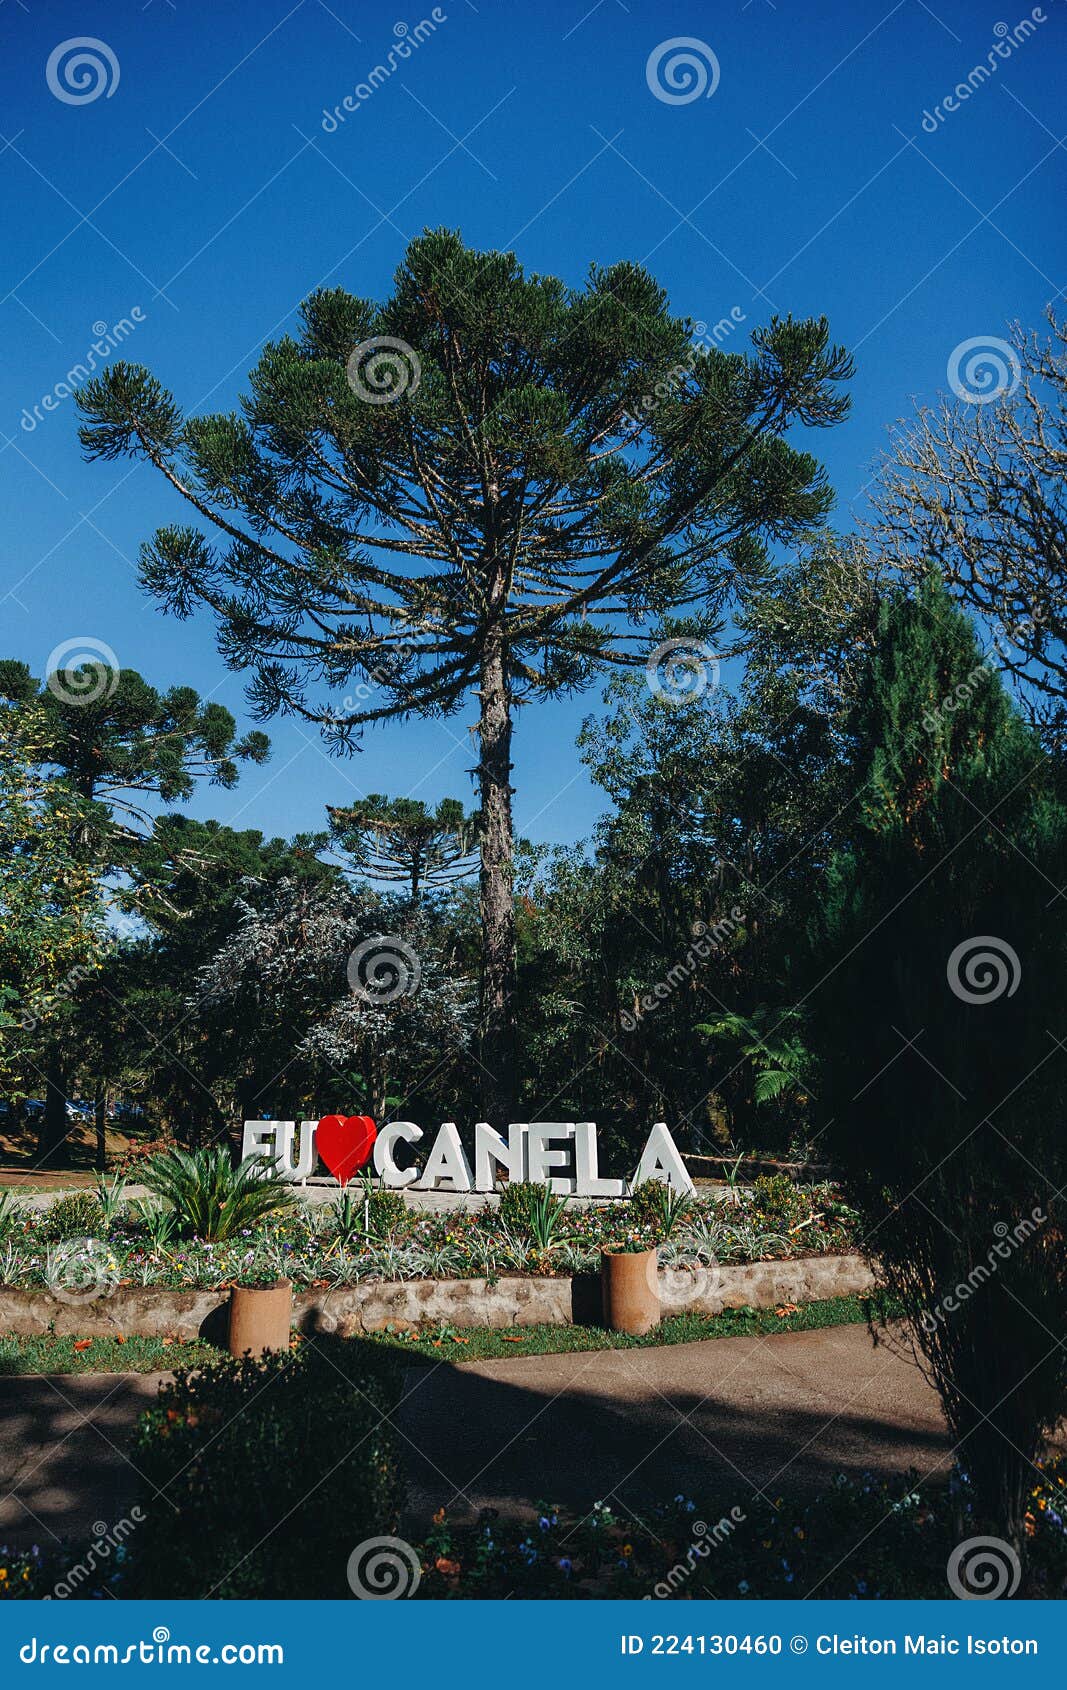 canela national park sign and tree